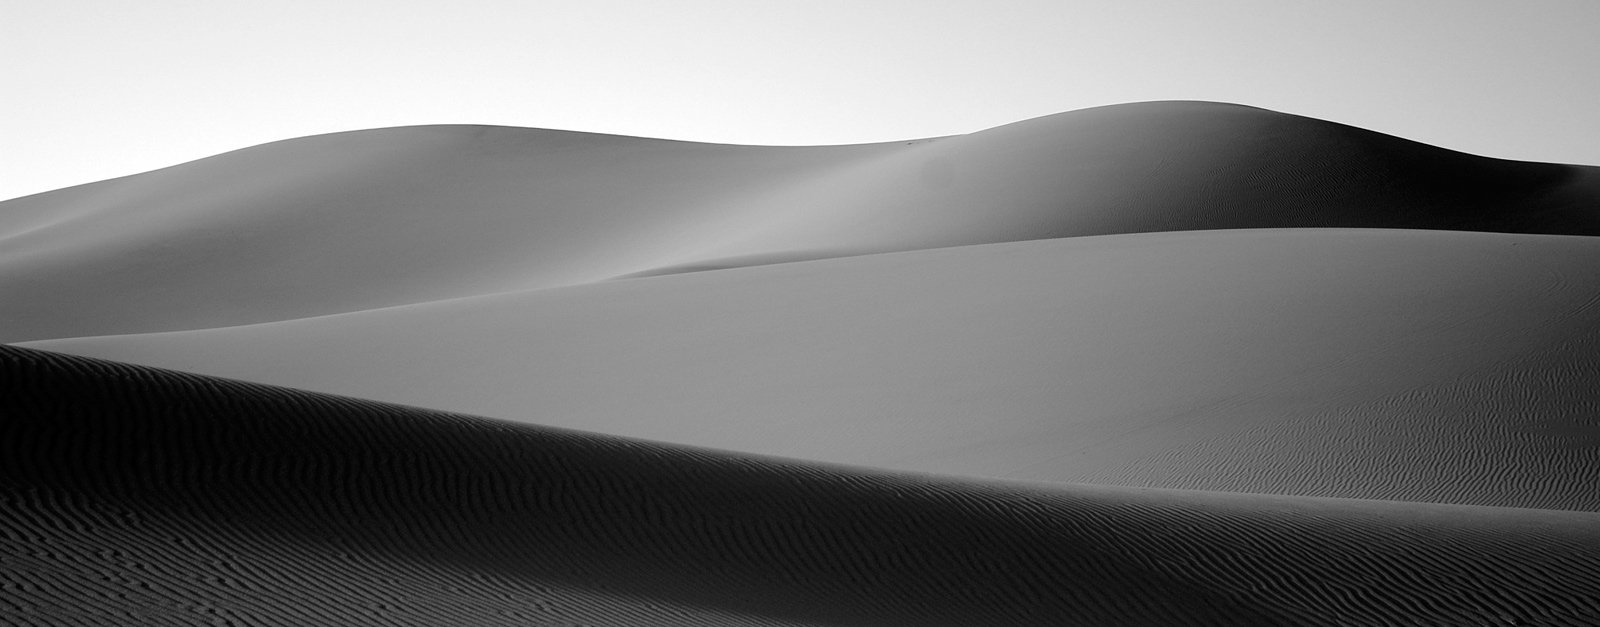 a black and white image of sand dunes